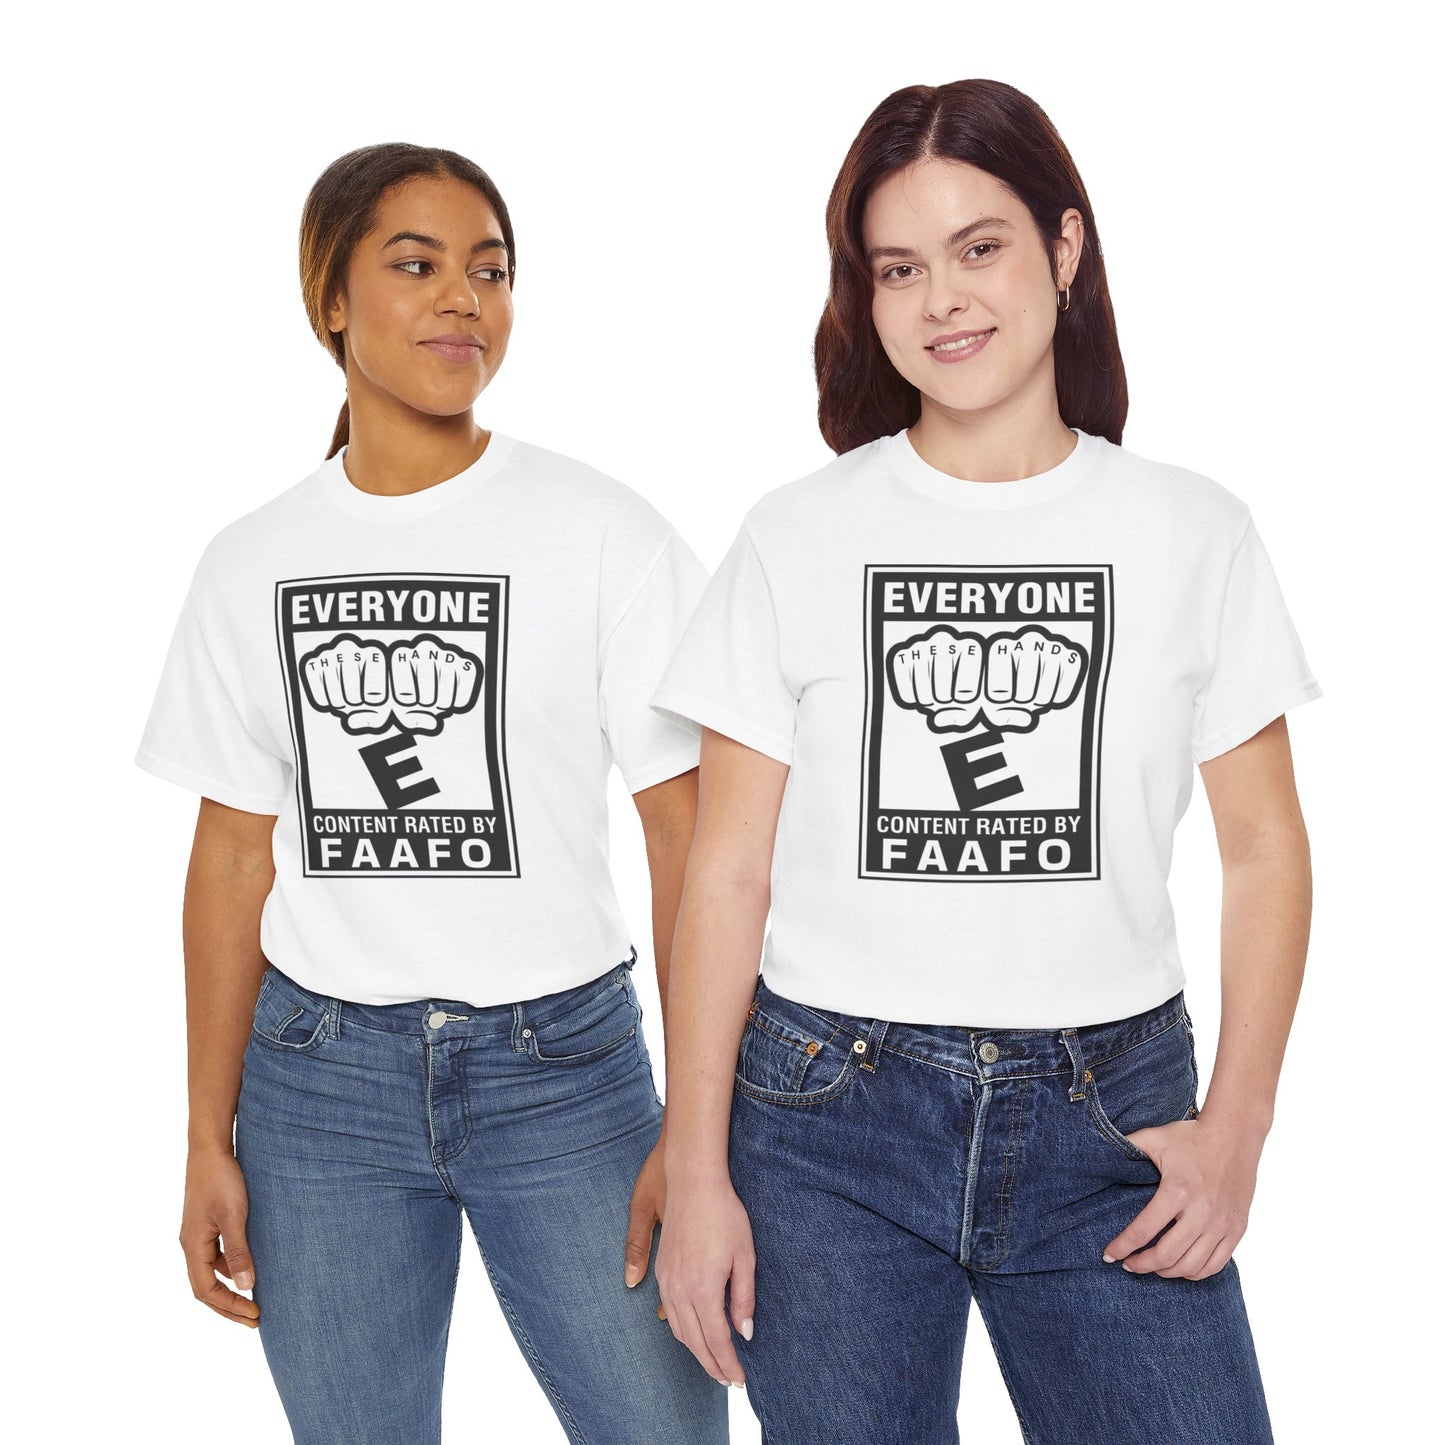 The Great Equalizer, These hands rated E for everyone Unisex Heavy Cotton Tee